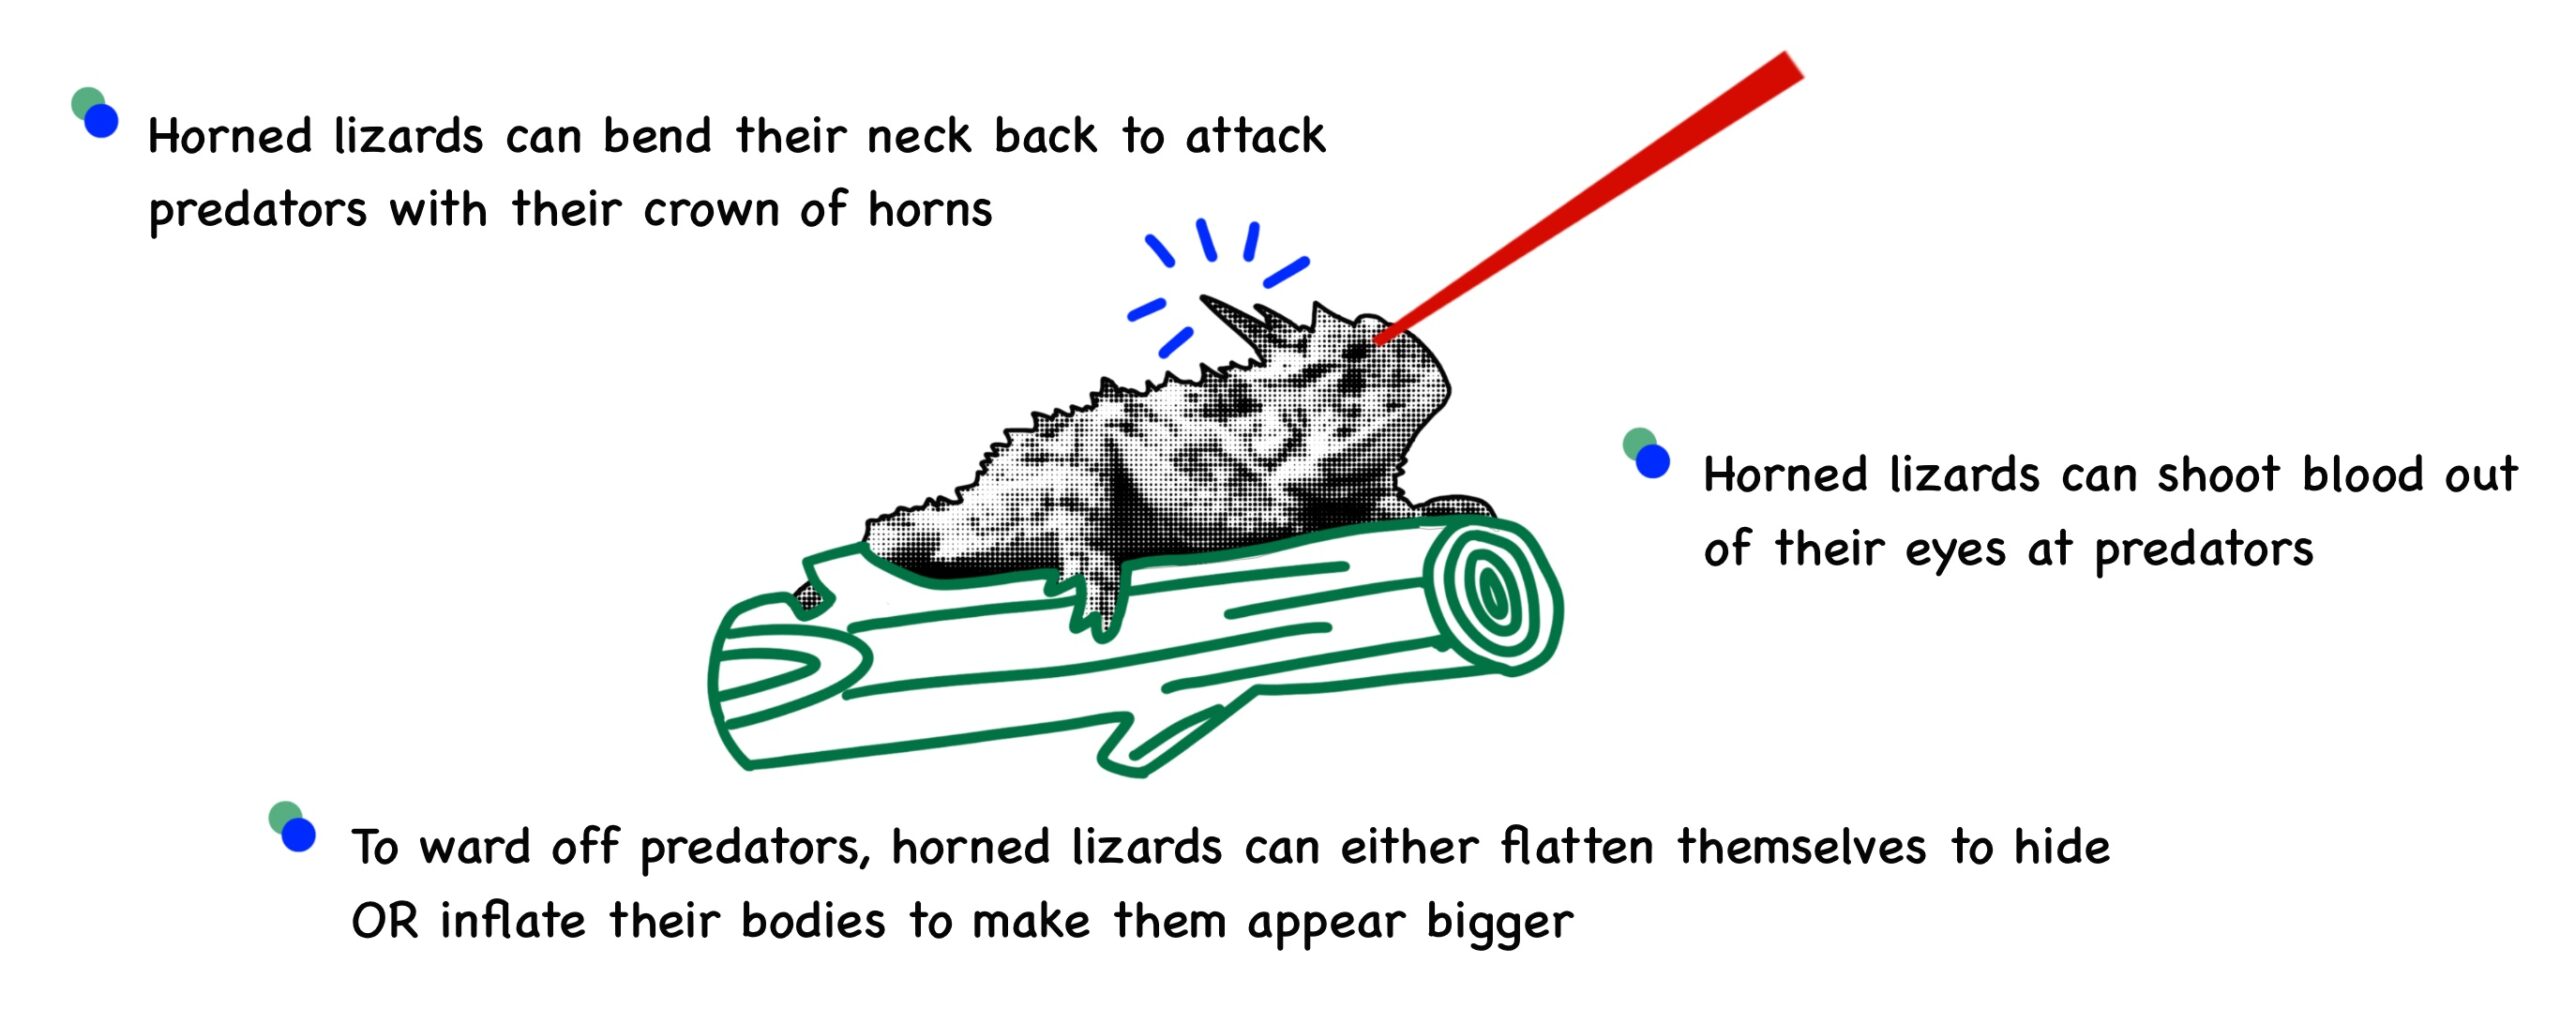 A graphic explaining how Texas Horned Lizards defend themselves from predators, including squirting blood from their eyes; bending their necks; and flattening their bodies.